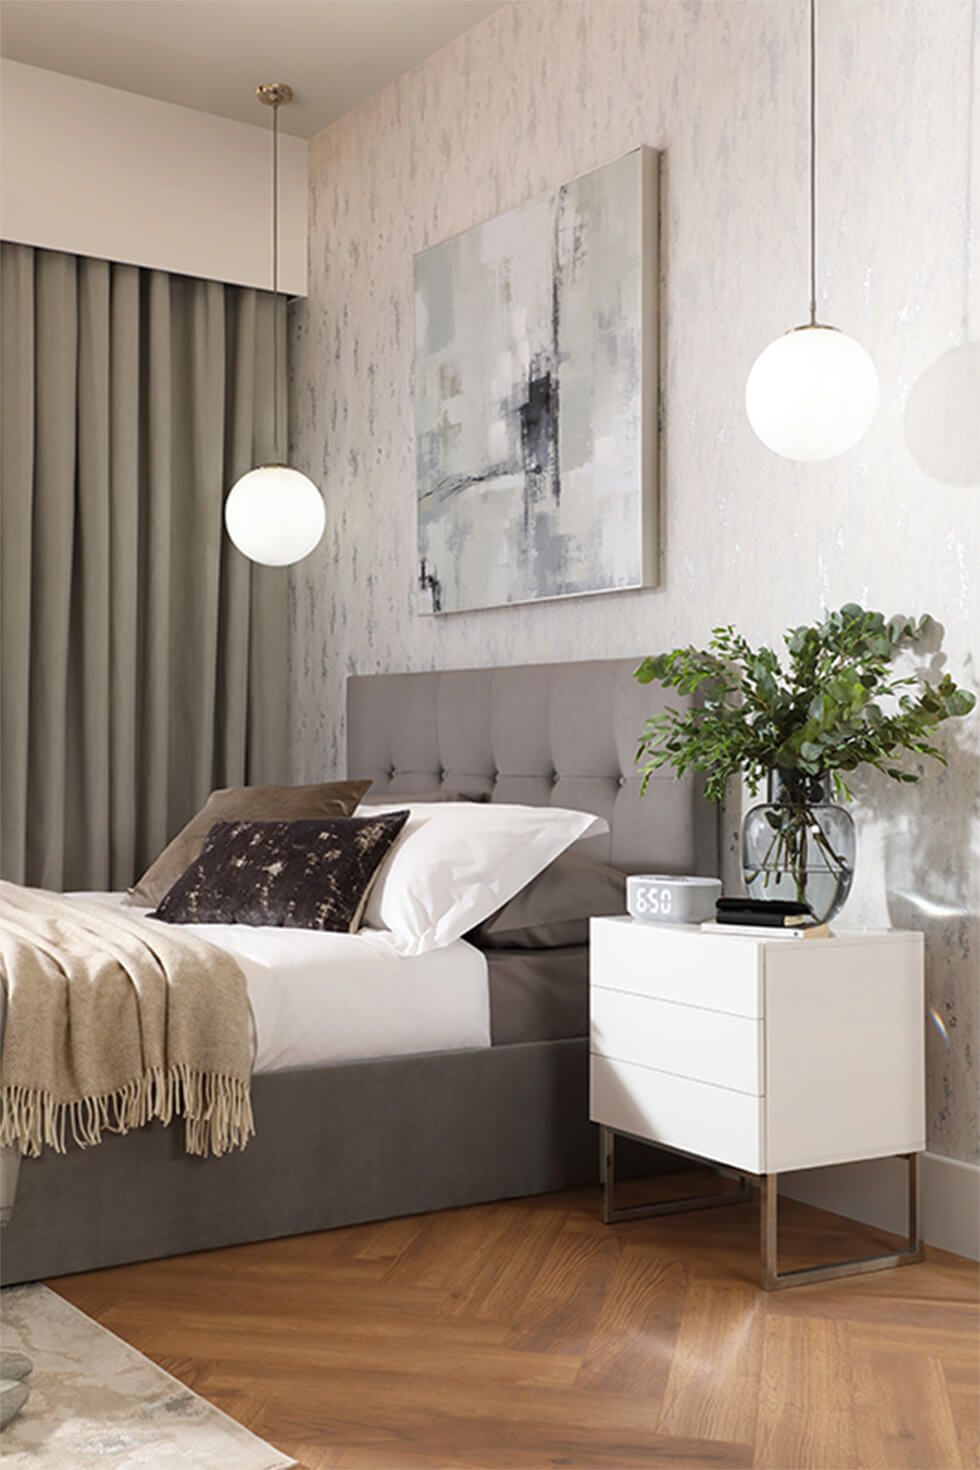 Bedroom with a tufted grey bed, pendants lamps and a white side table